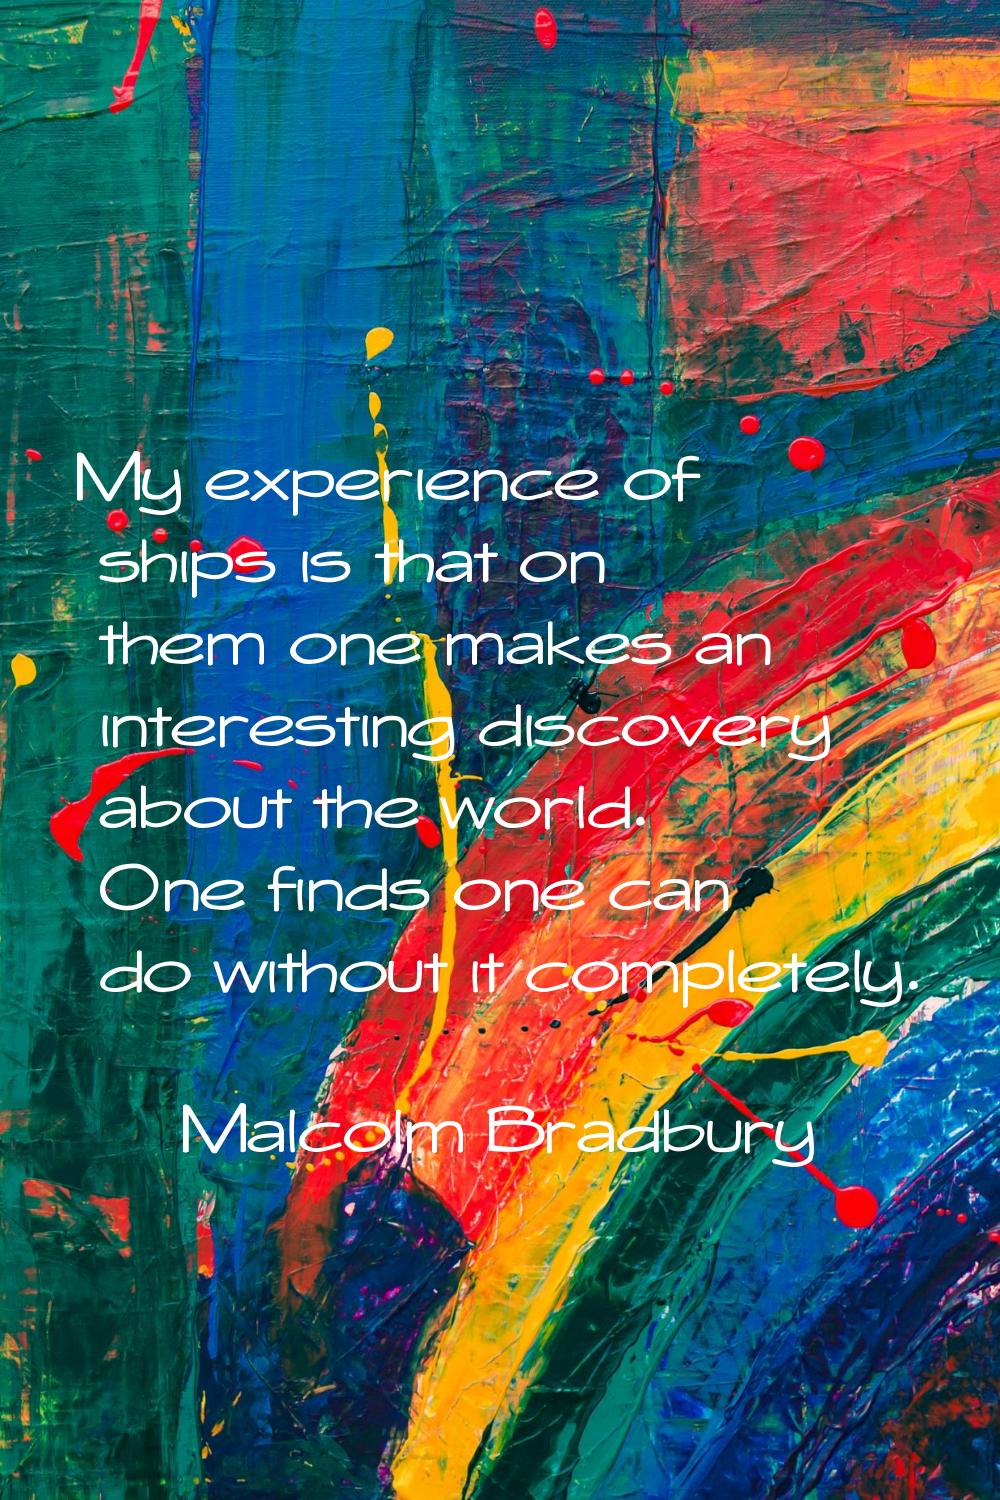 My experience of ships is that on them one makes an interesting discovery about the world. One find